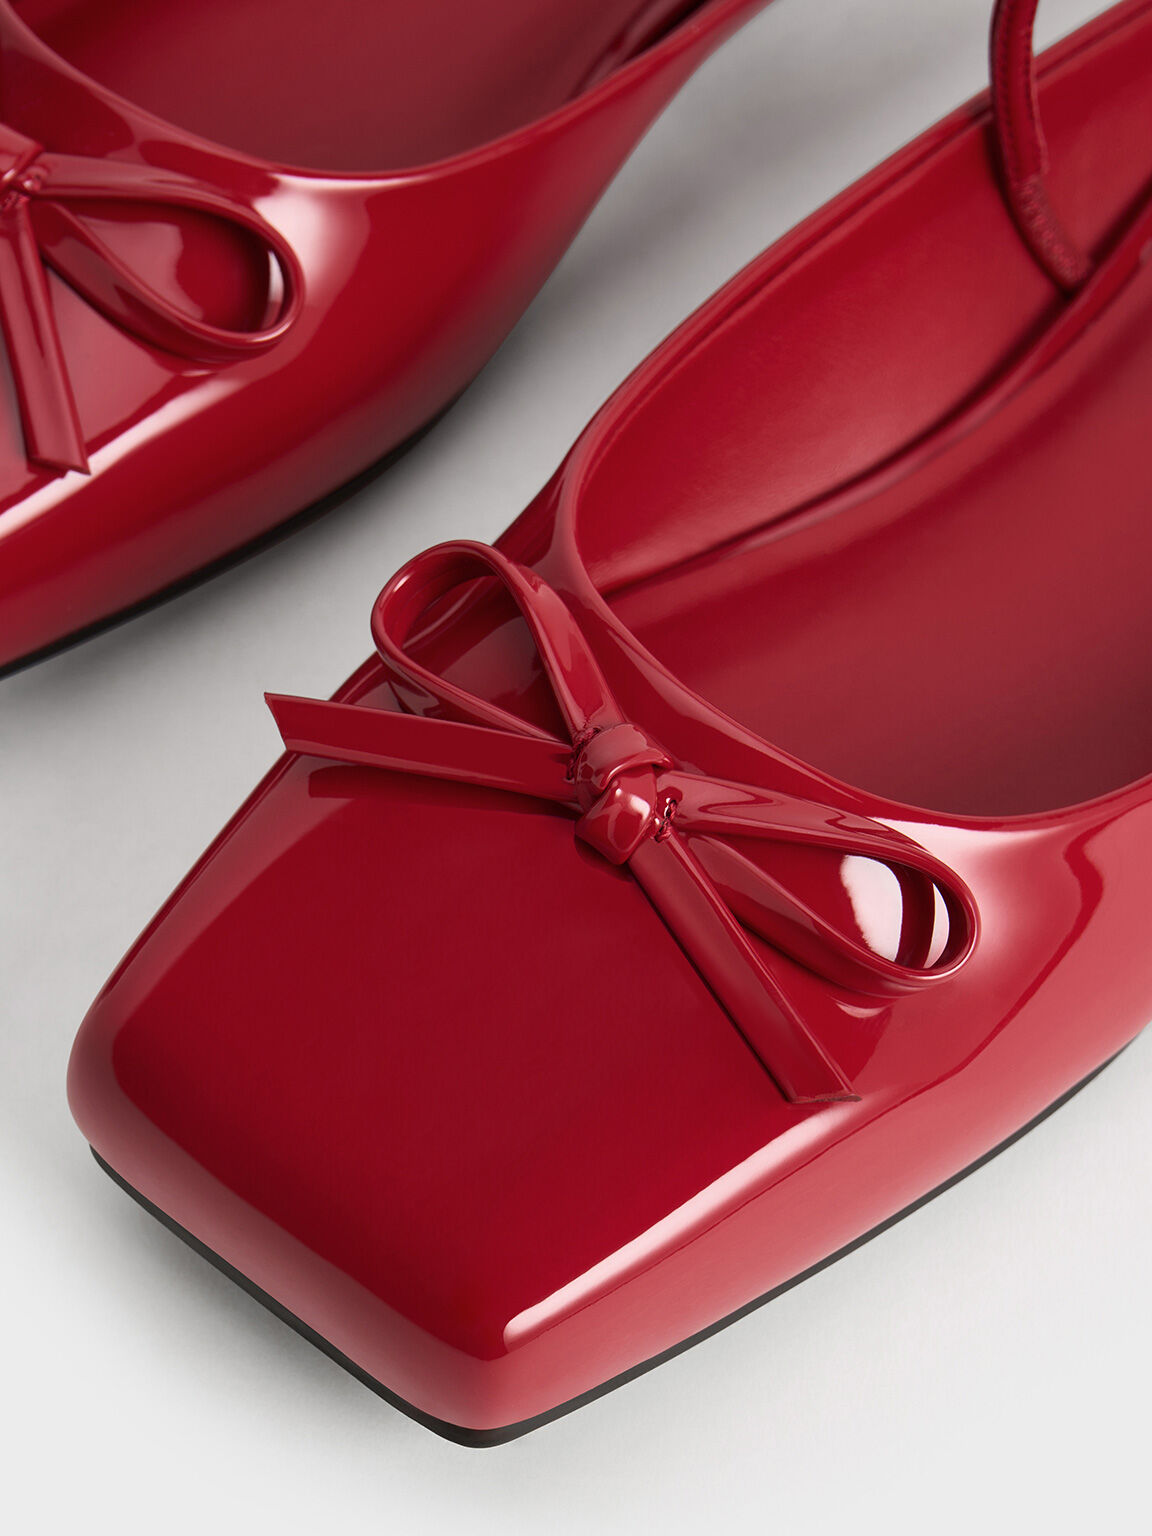 Bow Square-Toe Ballet Mules, Red, hi-res